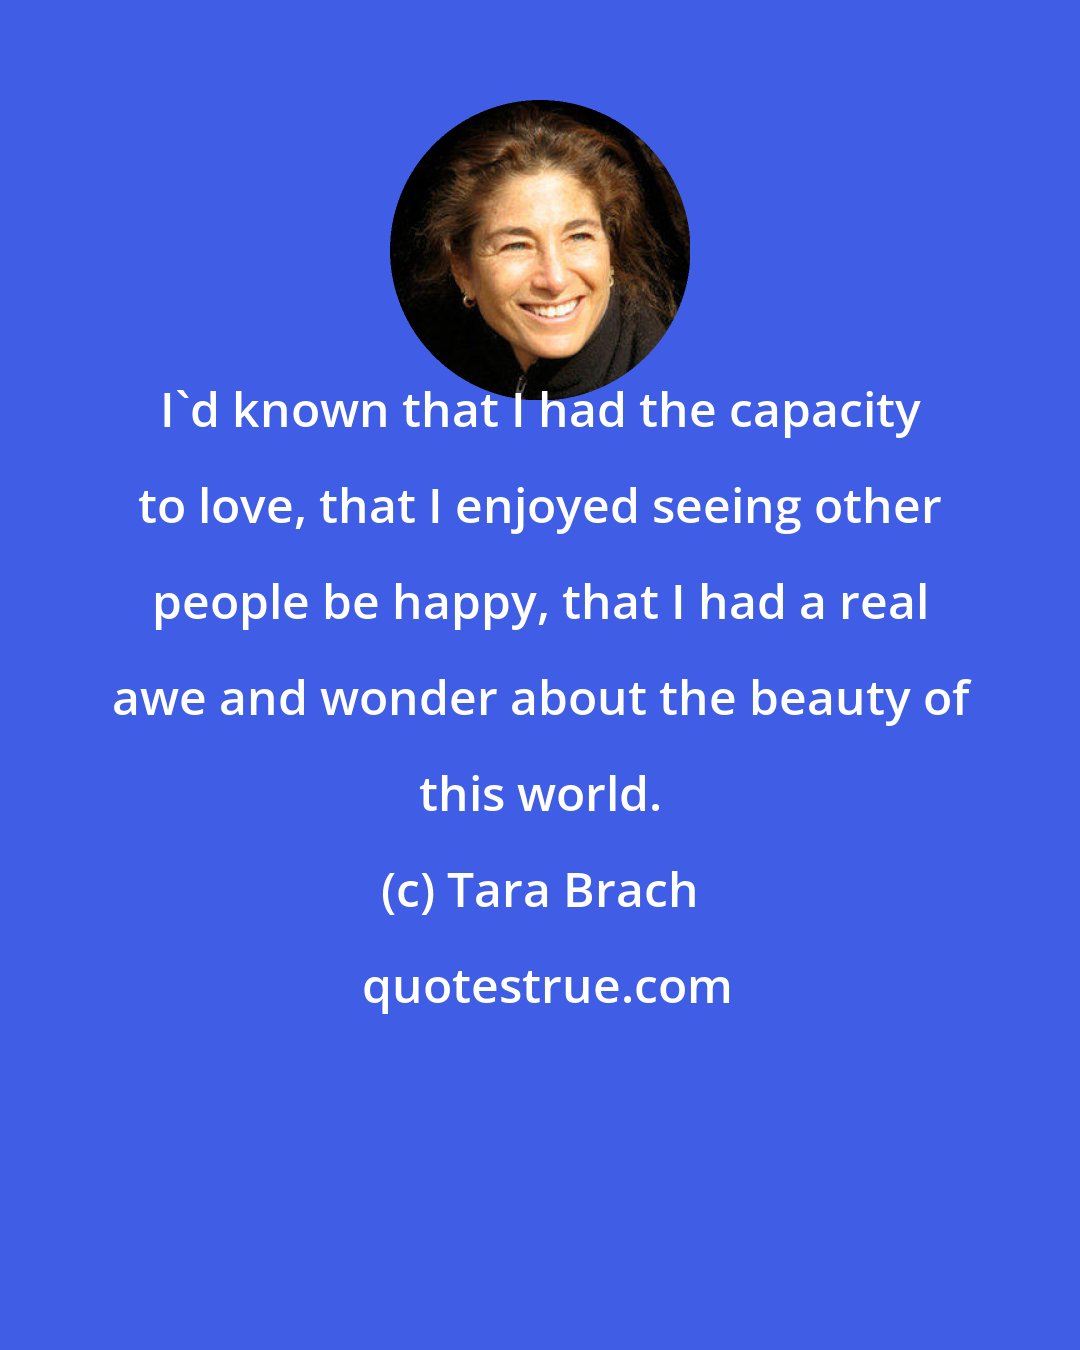 Tara Brach: I'd known that I had the capacity to love, that I enjoyed seeing other people be happy, that I had a real awe and wonder about the beauty of this world.